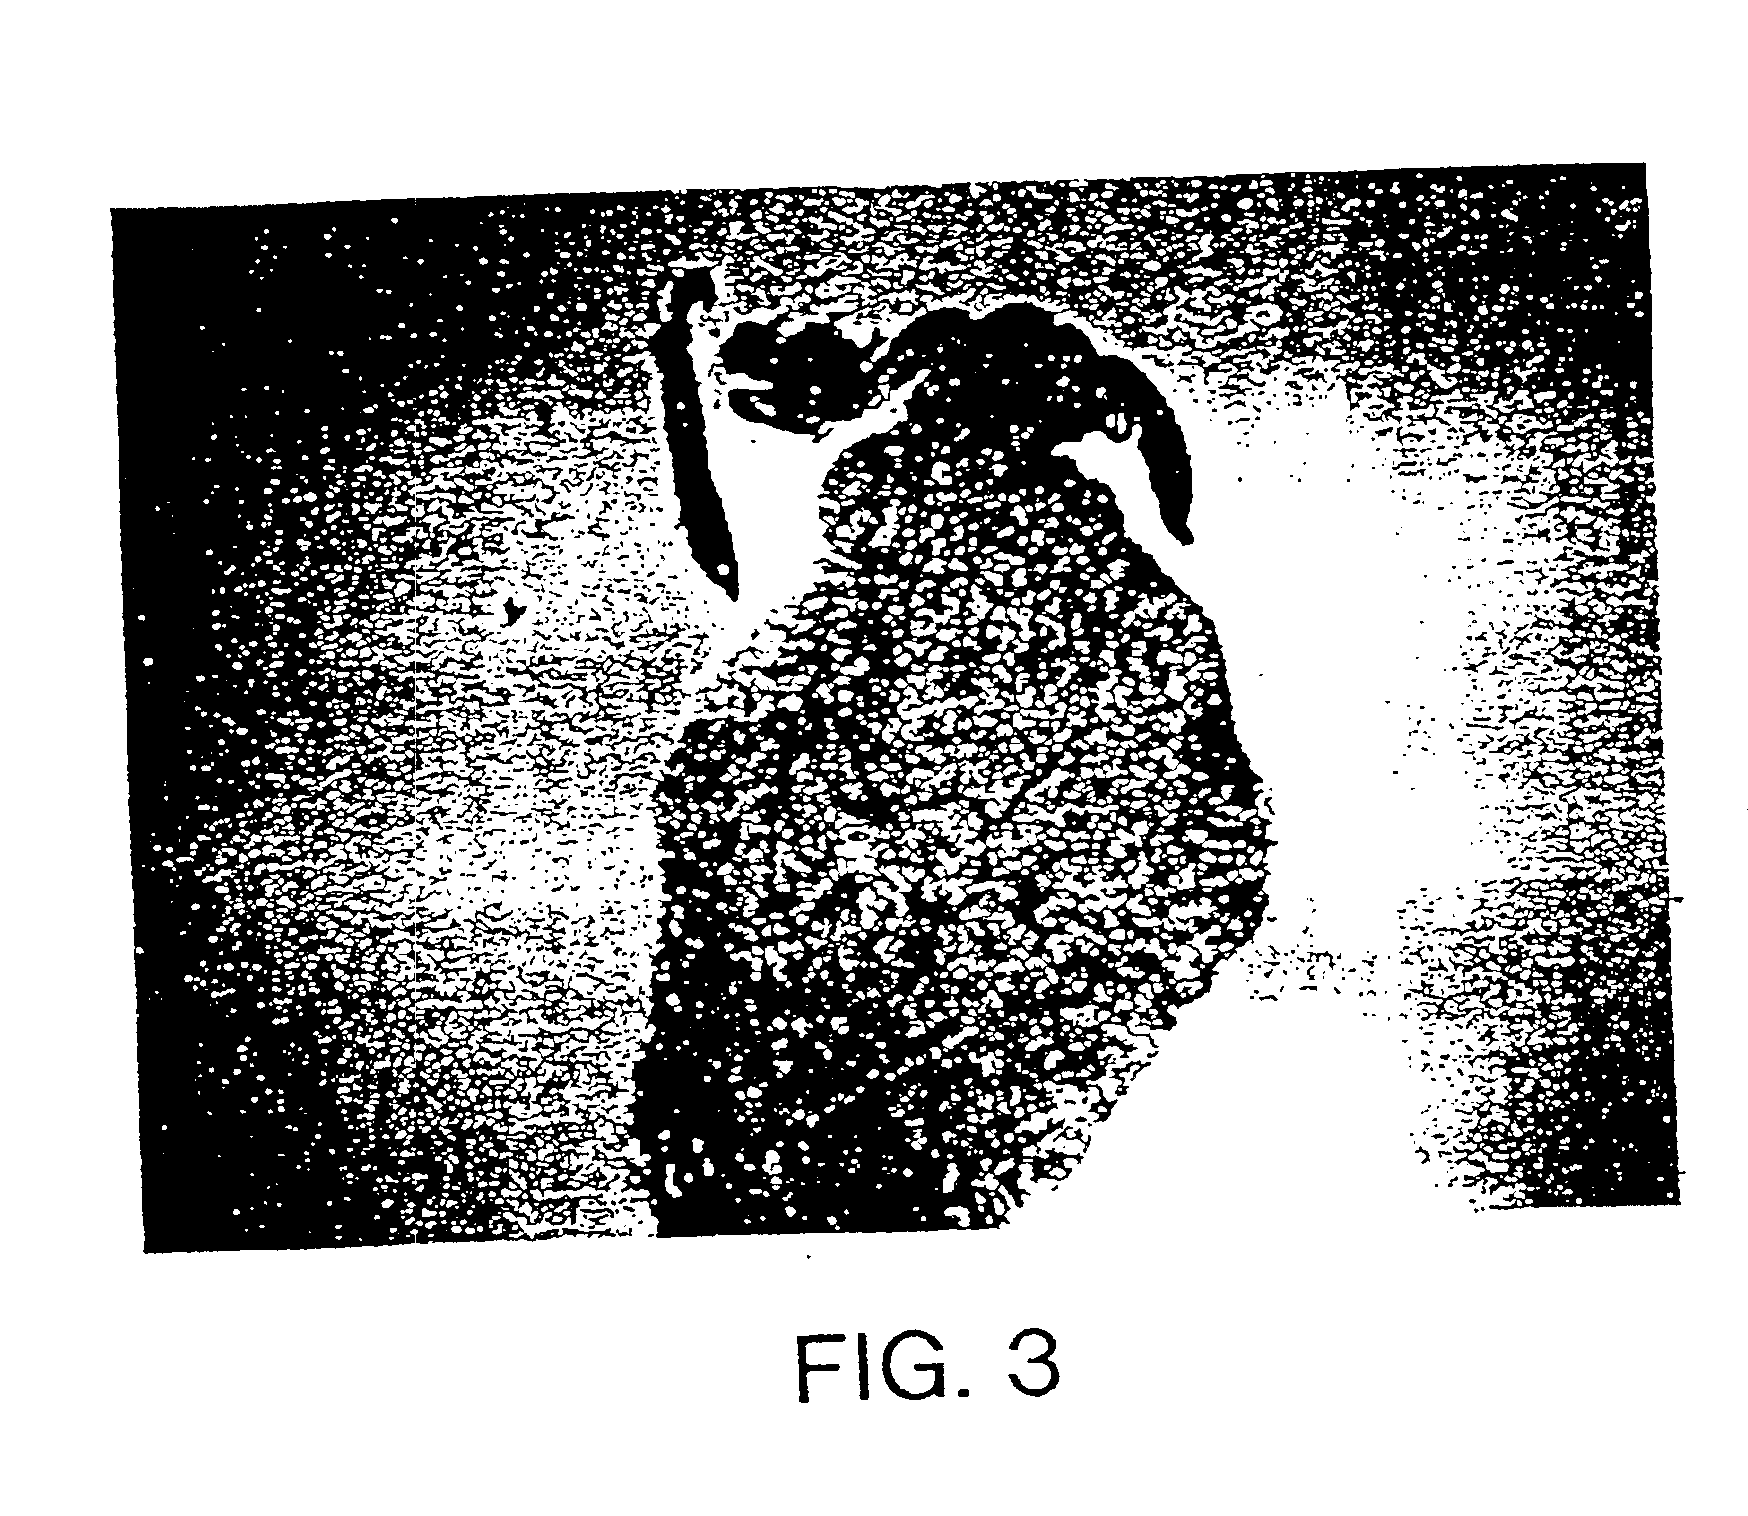 Gene transfer for studying and treating a connective tissue of a mammalian host